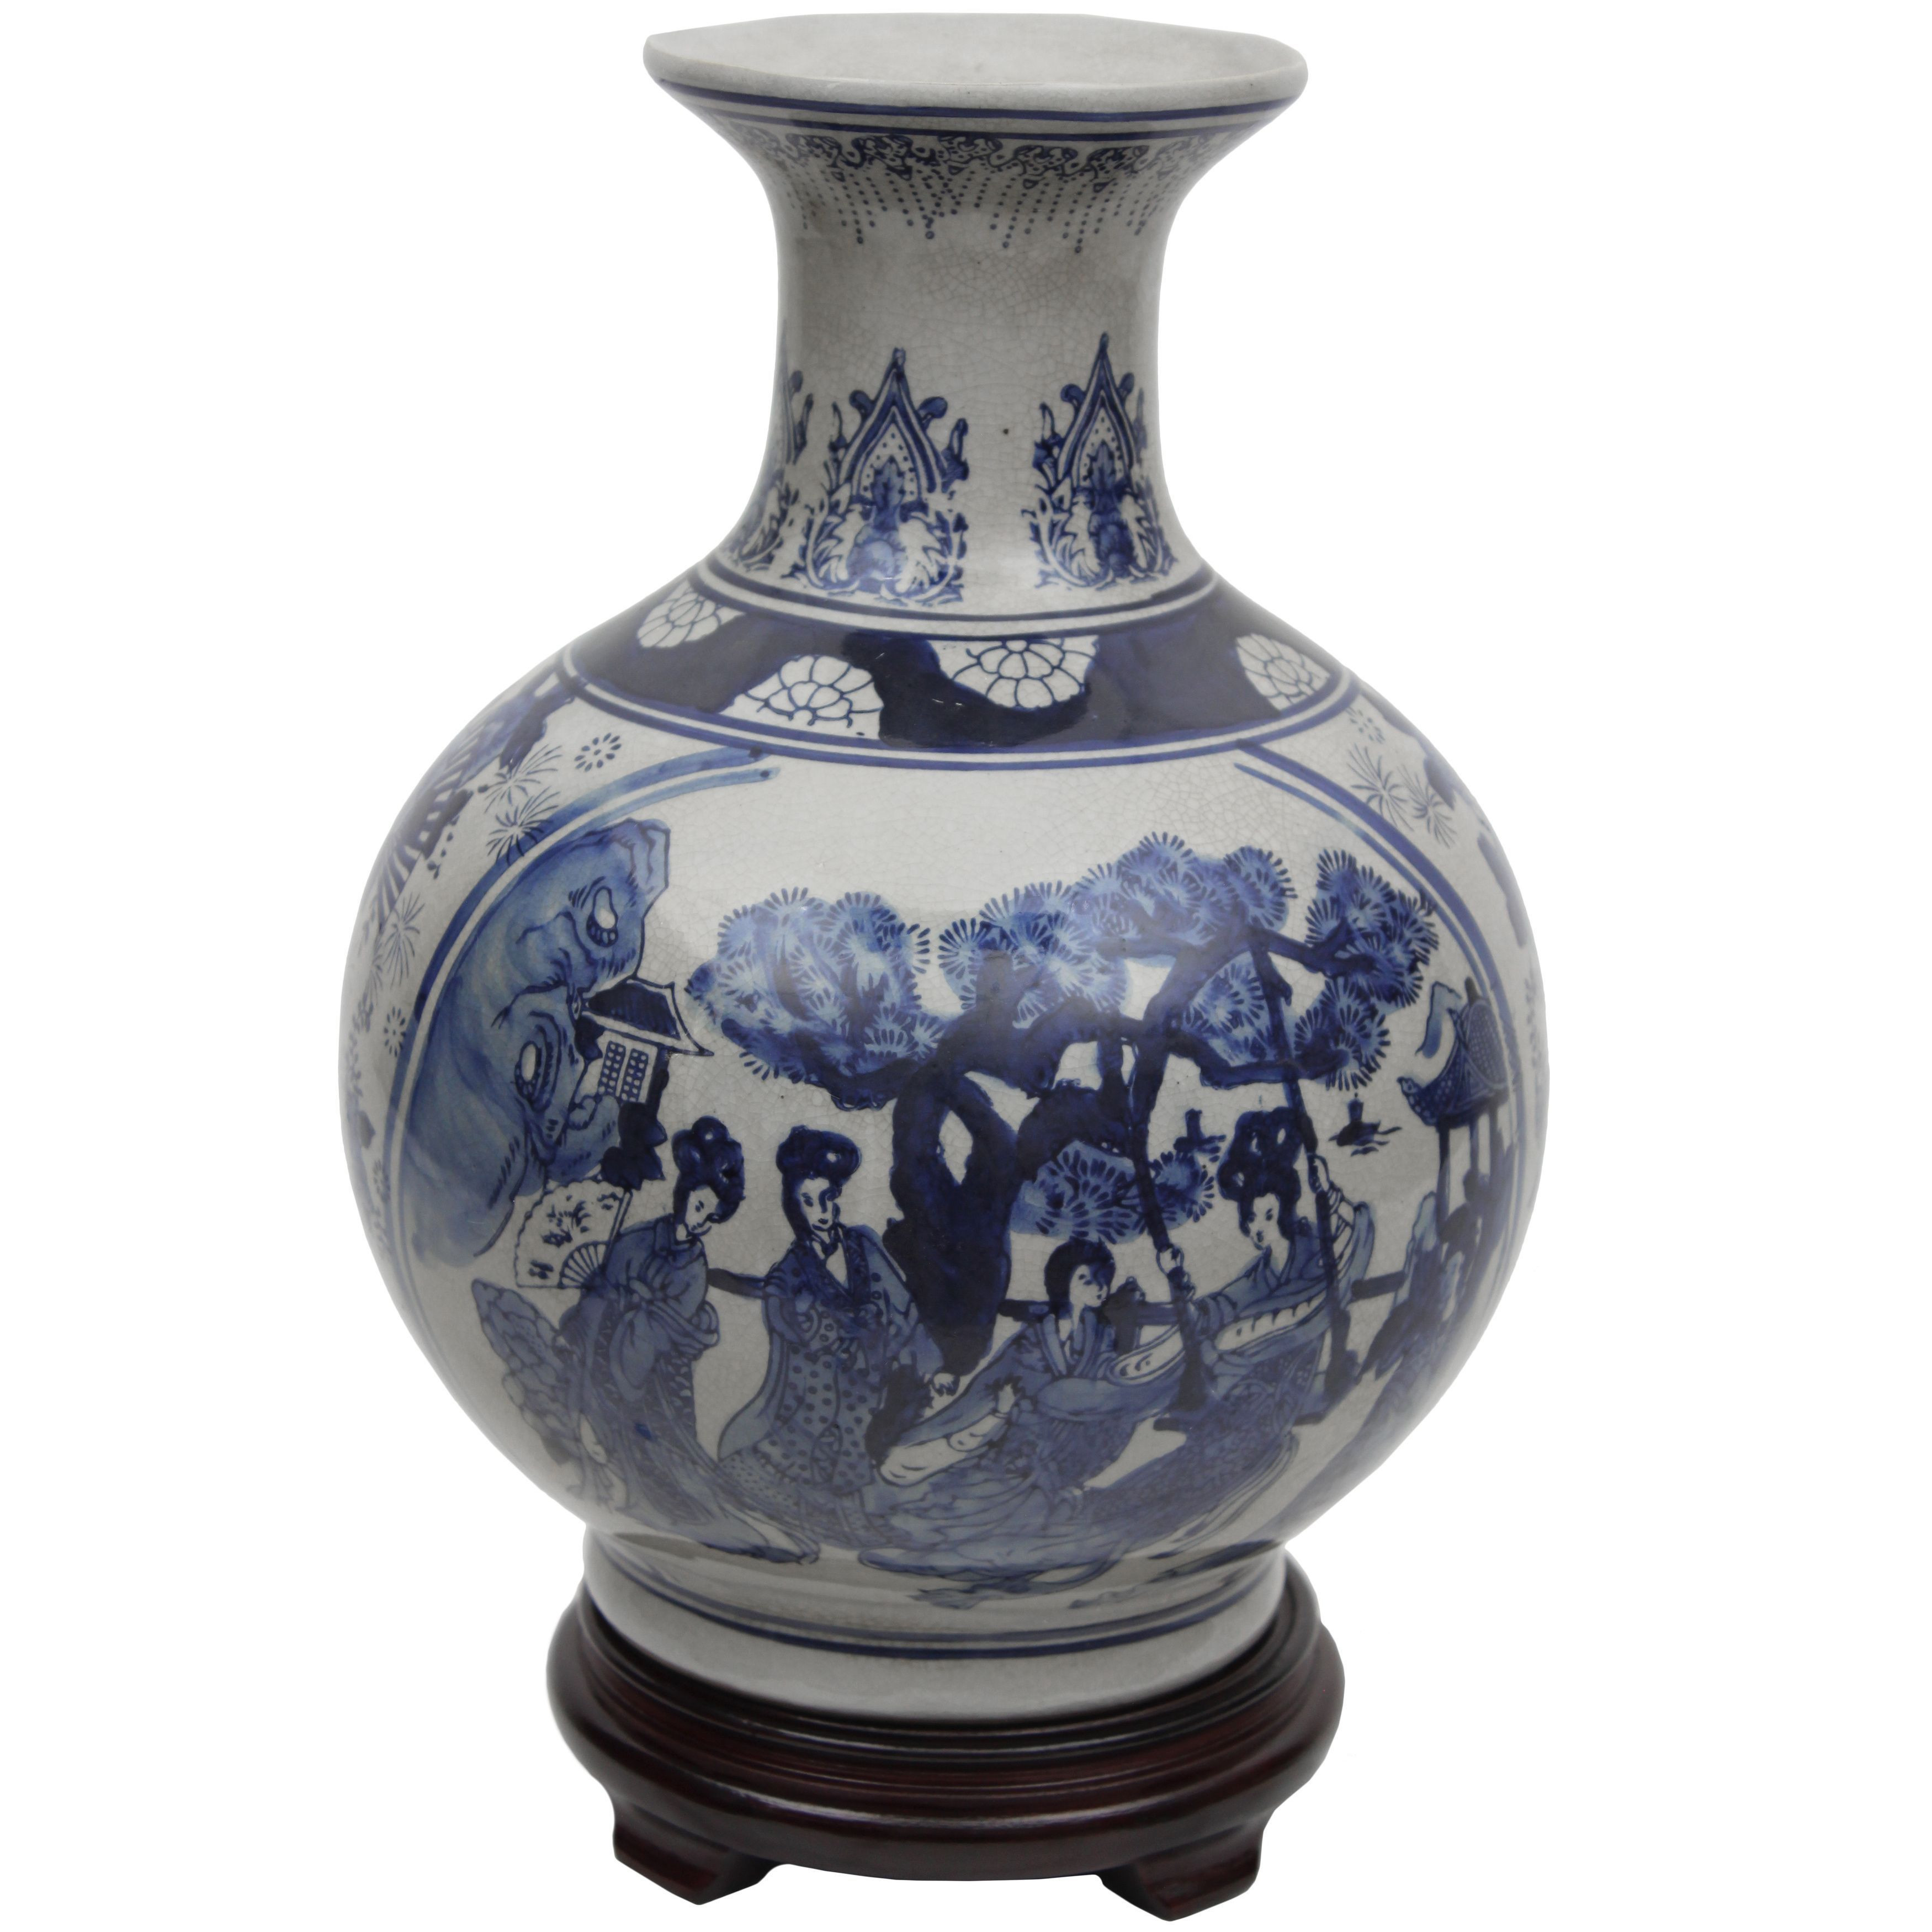 20 Fabulous Chinese Porcelain Vases for Sale 2022 free download chinese porcelain vases for sale of photos of white pottery vase vases artificial plants collection intended for handmade 14 inch blue and white porcelain vase china size medium